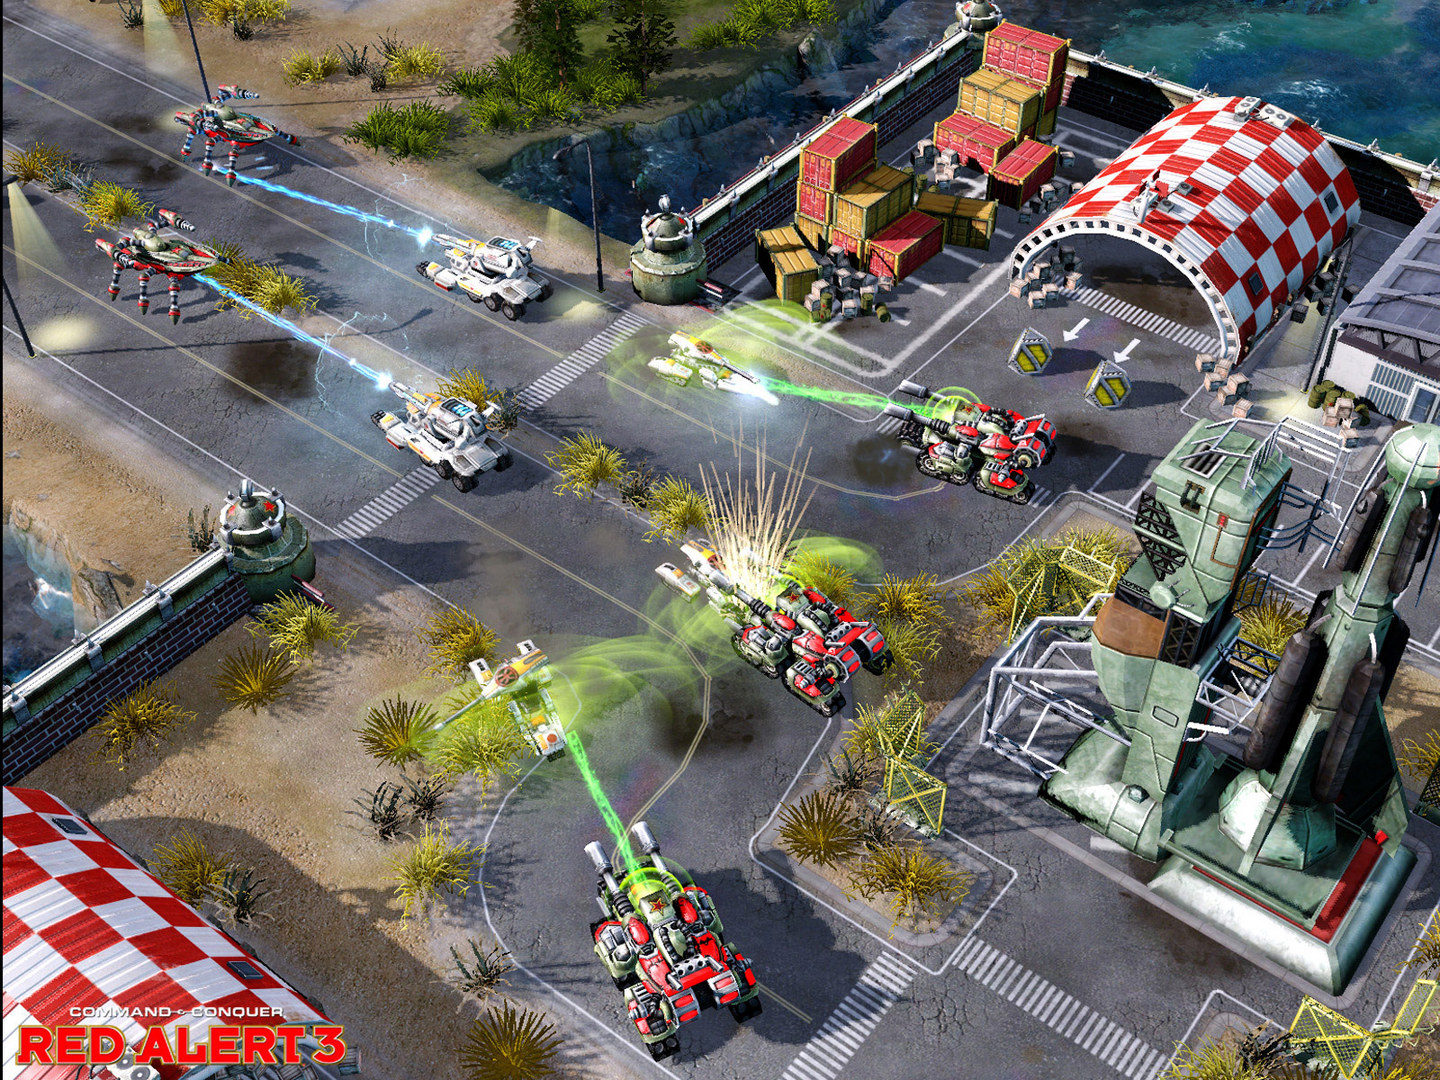 command and conquer red alert pc